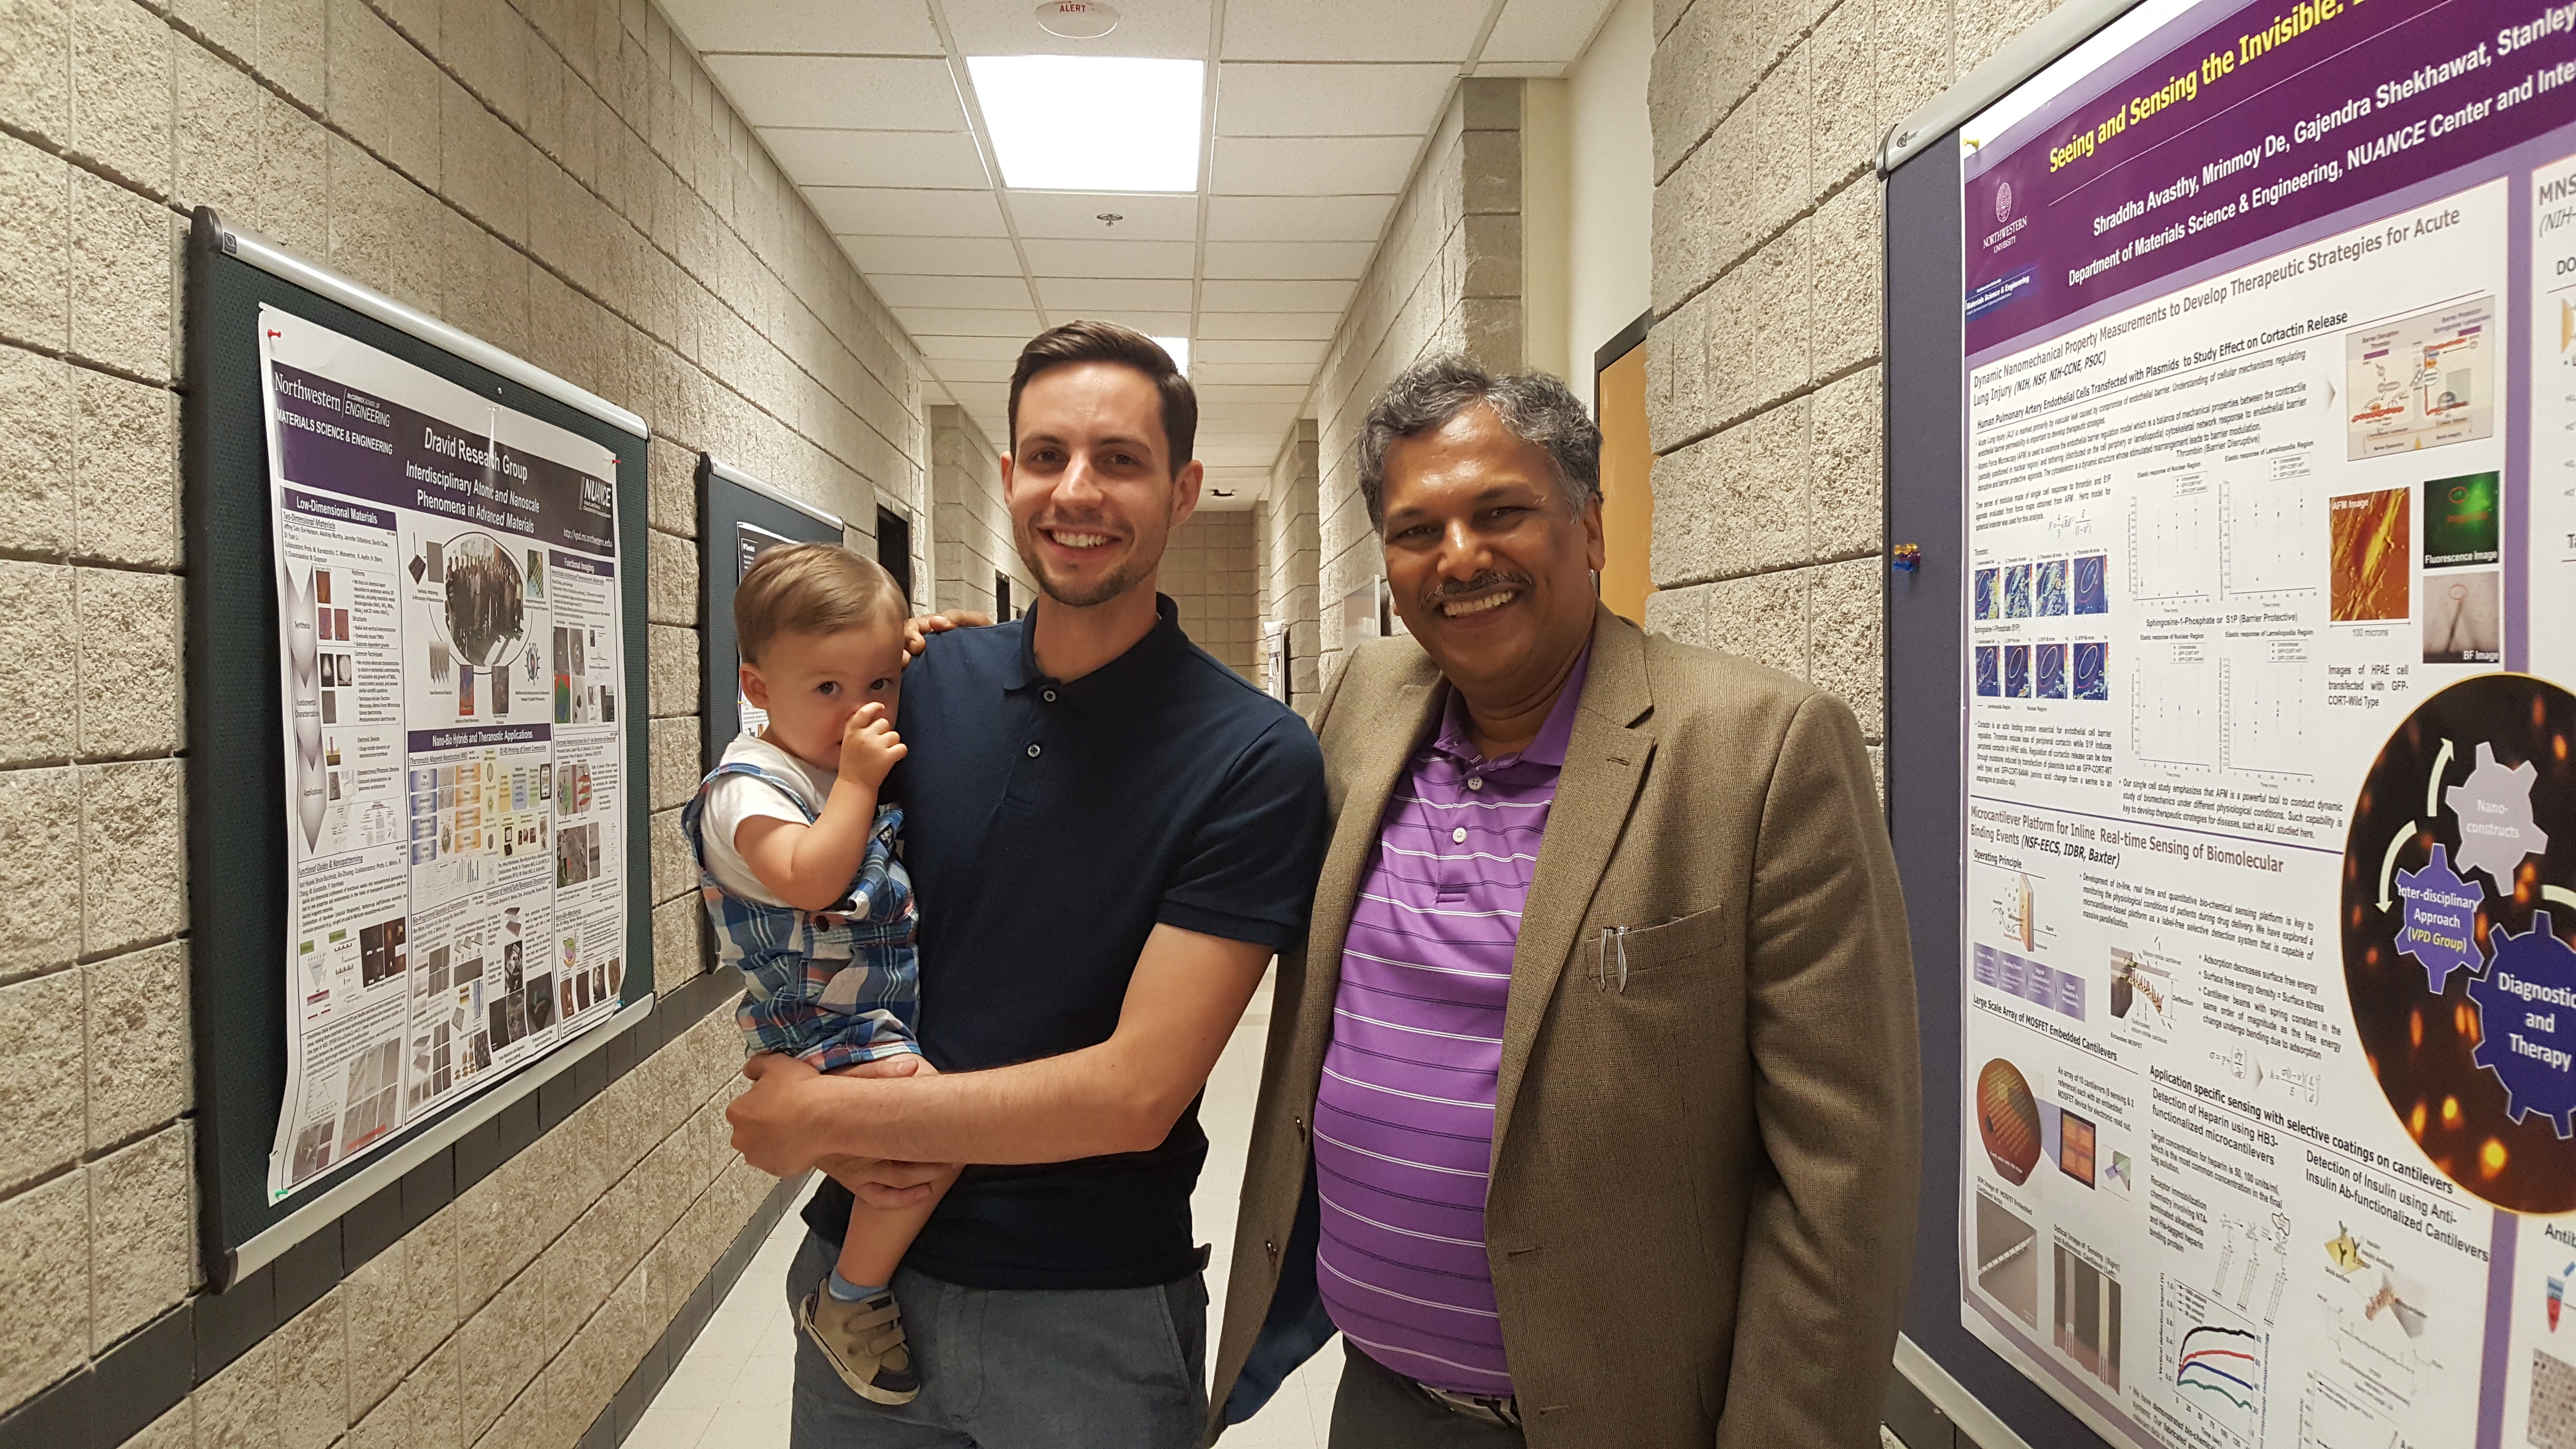 Professor Dravid (right) posed with VPD Group alumnus Jeff Cain and his son Liam.